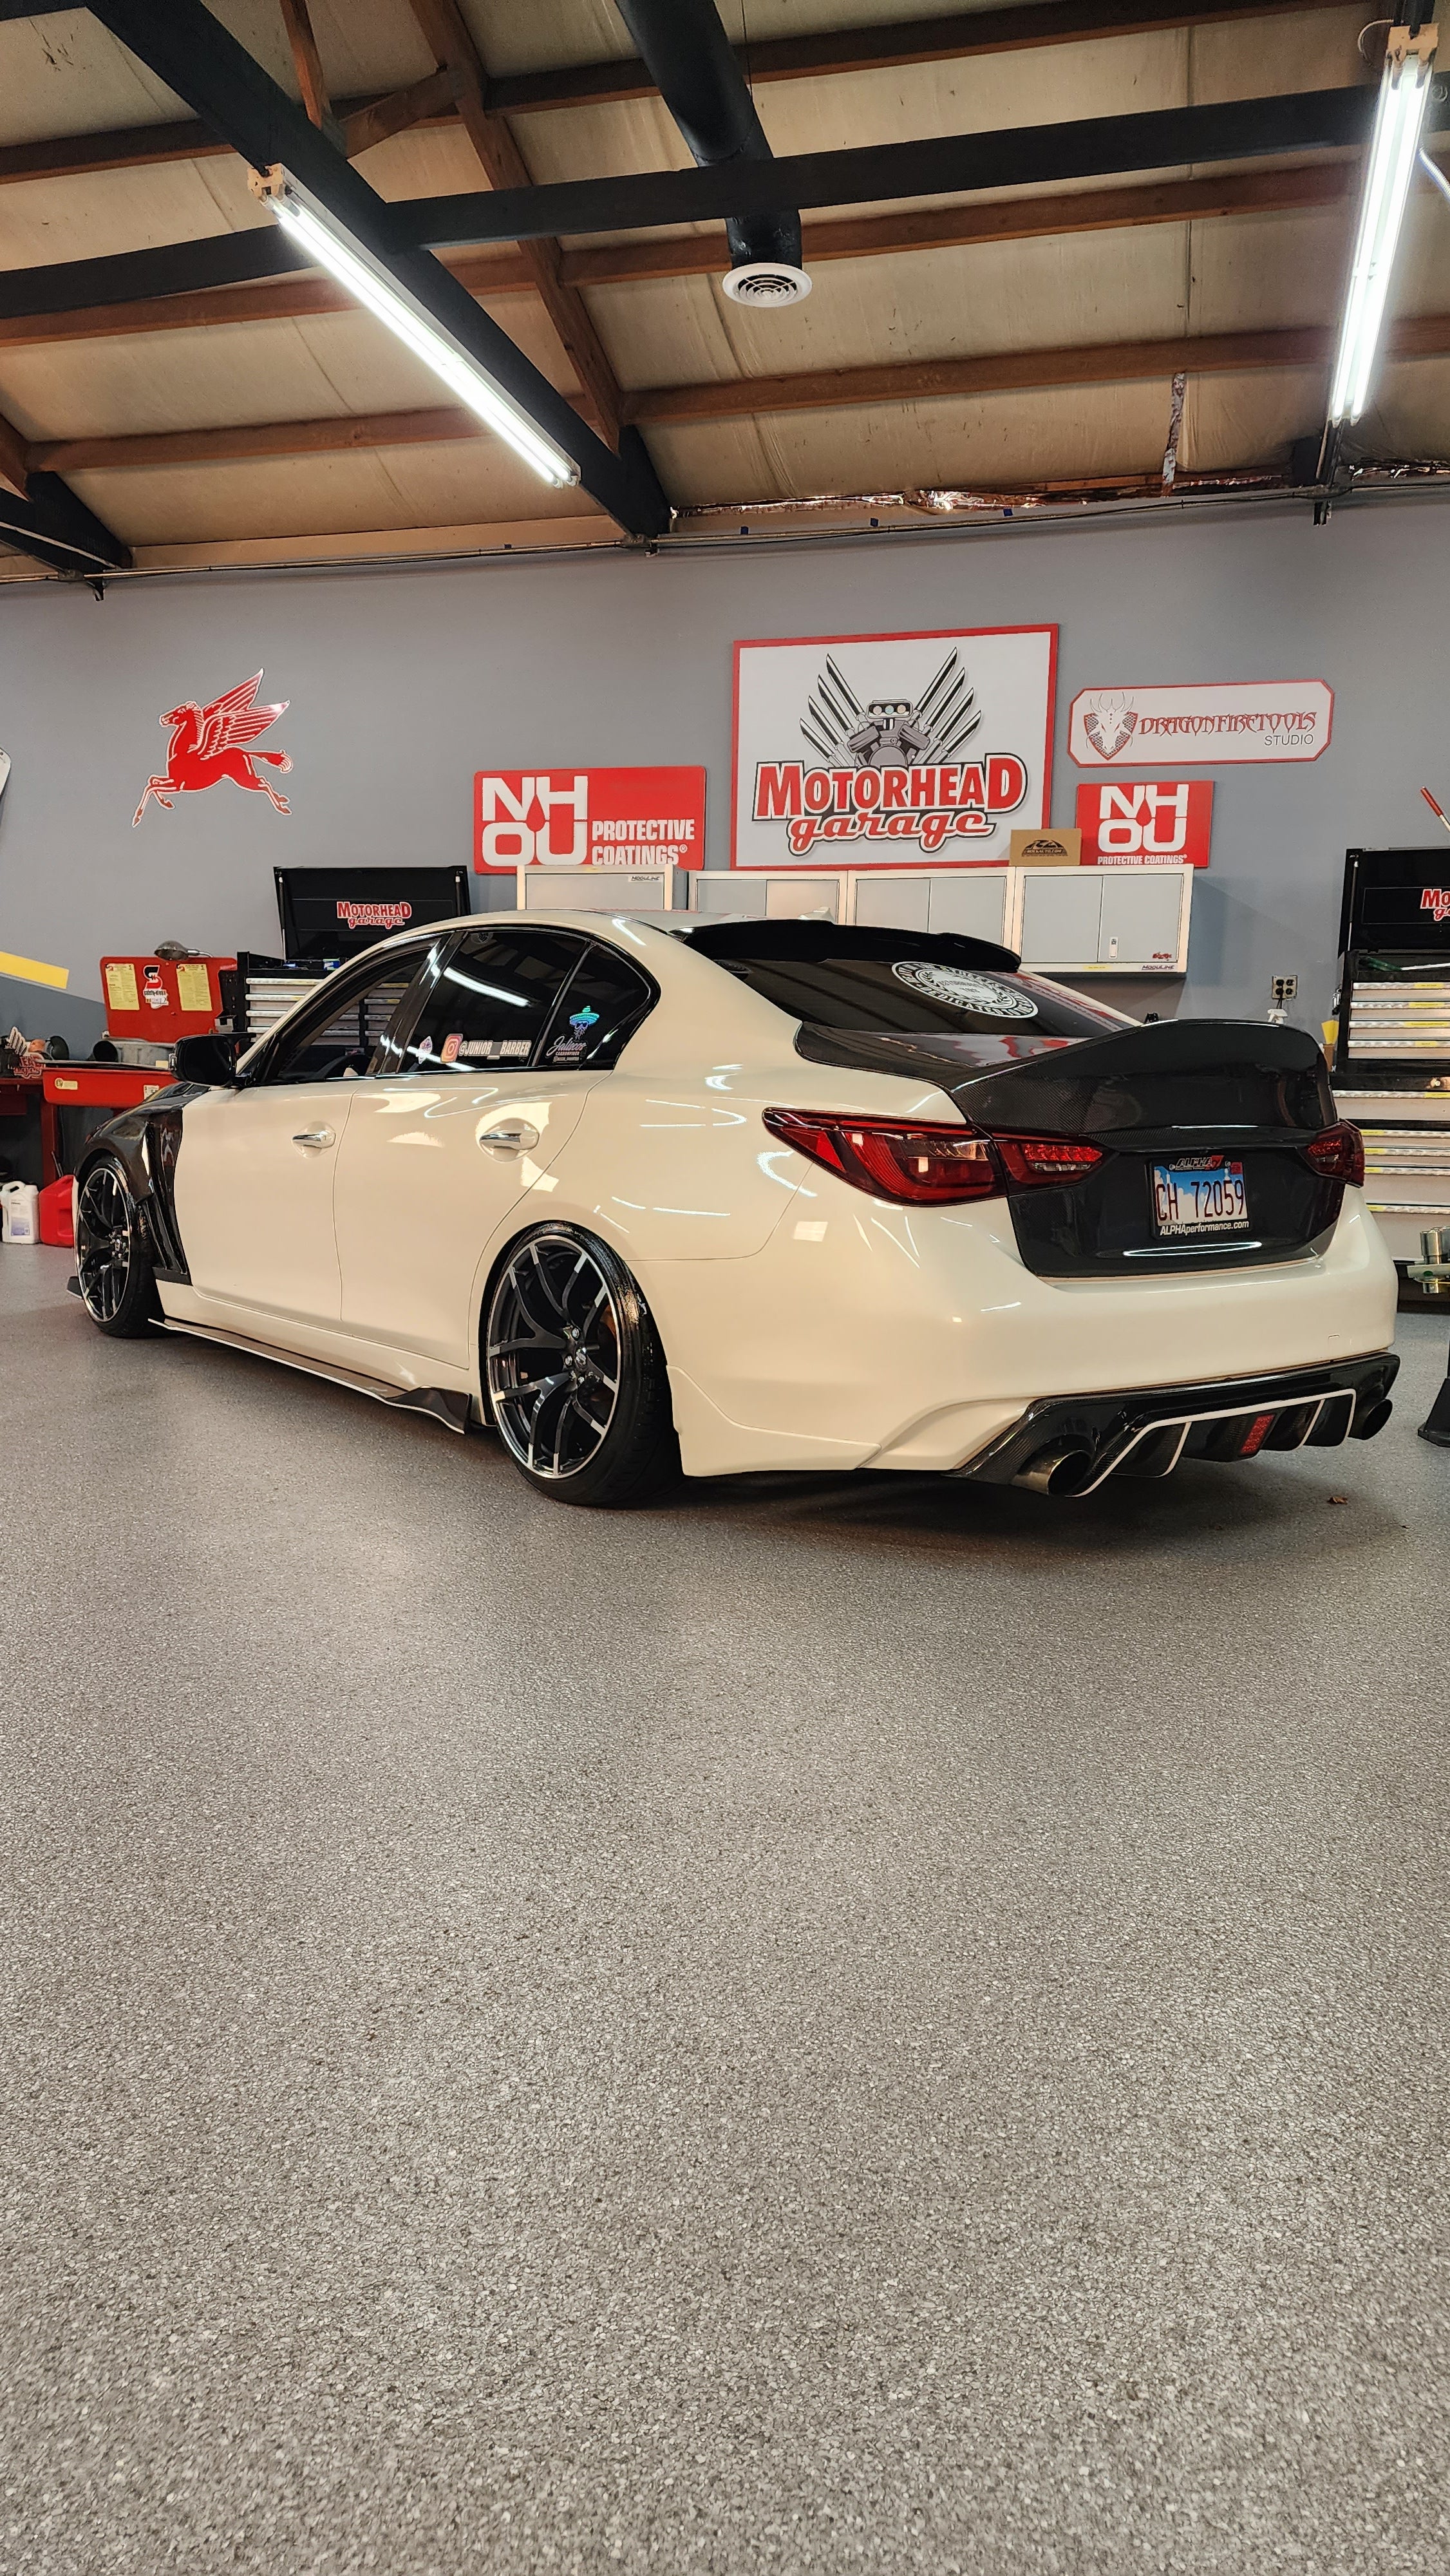 Side rear perspective of a cream-colored Infiniti Q50 with JCF Carbon Fiber Trunk, exhibited in an automotive shop setting, emphasizing the aftermarket upgrade.